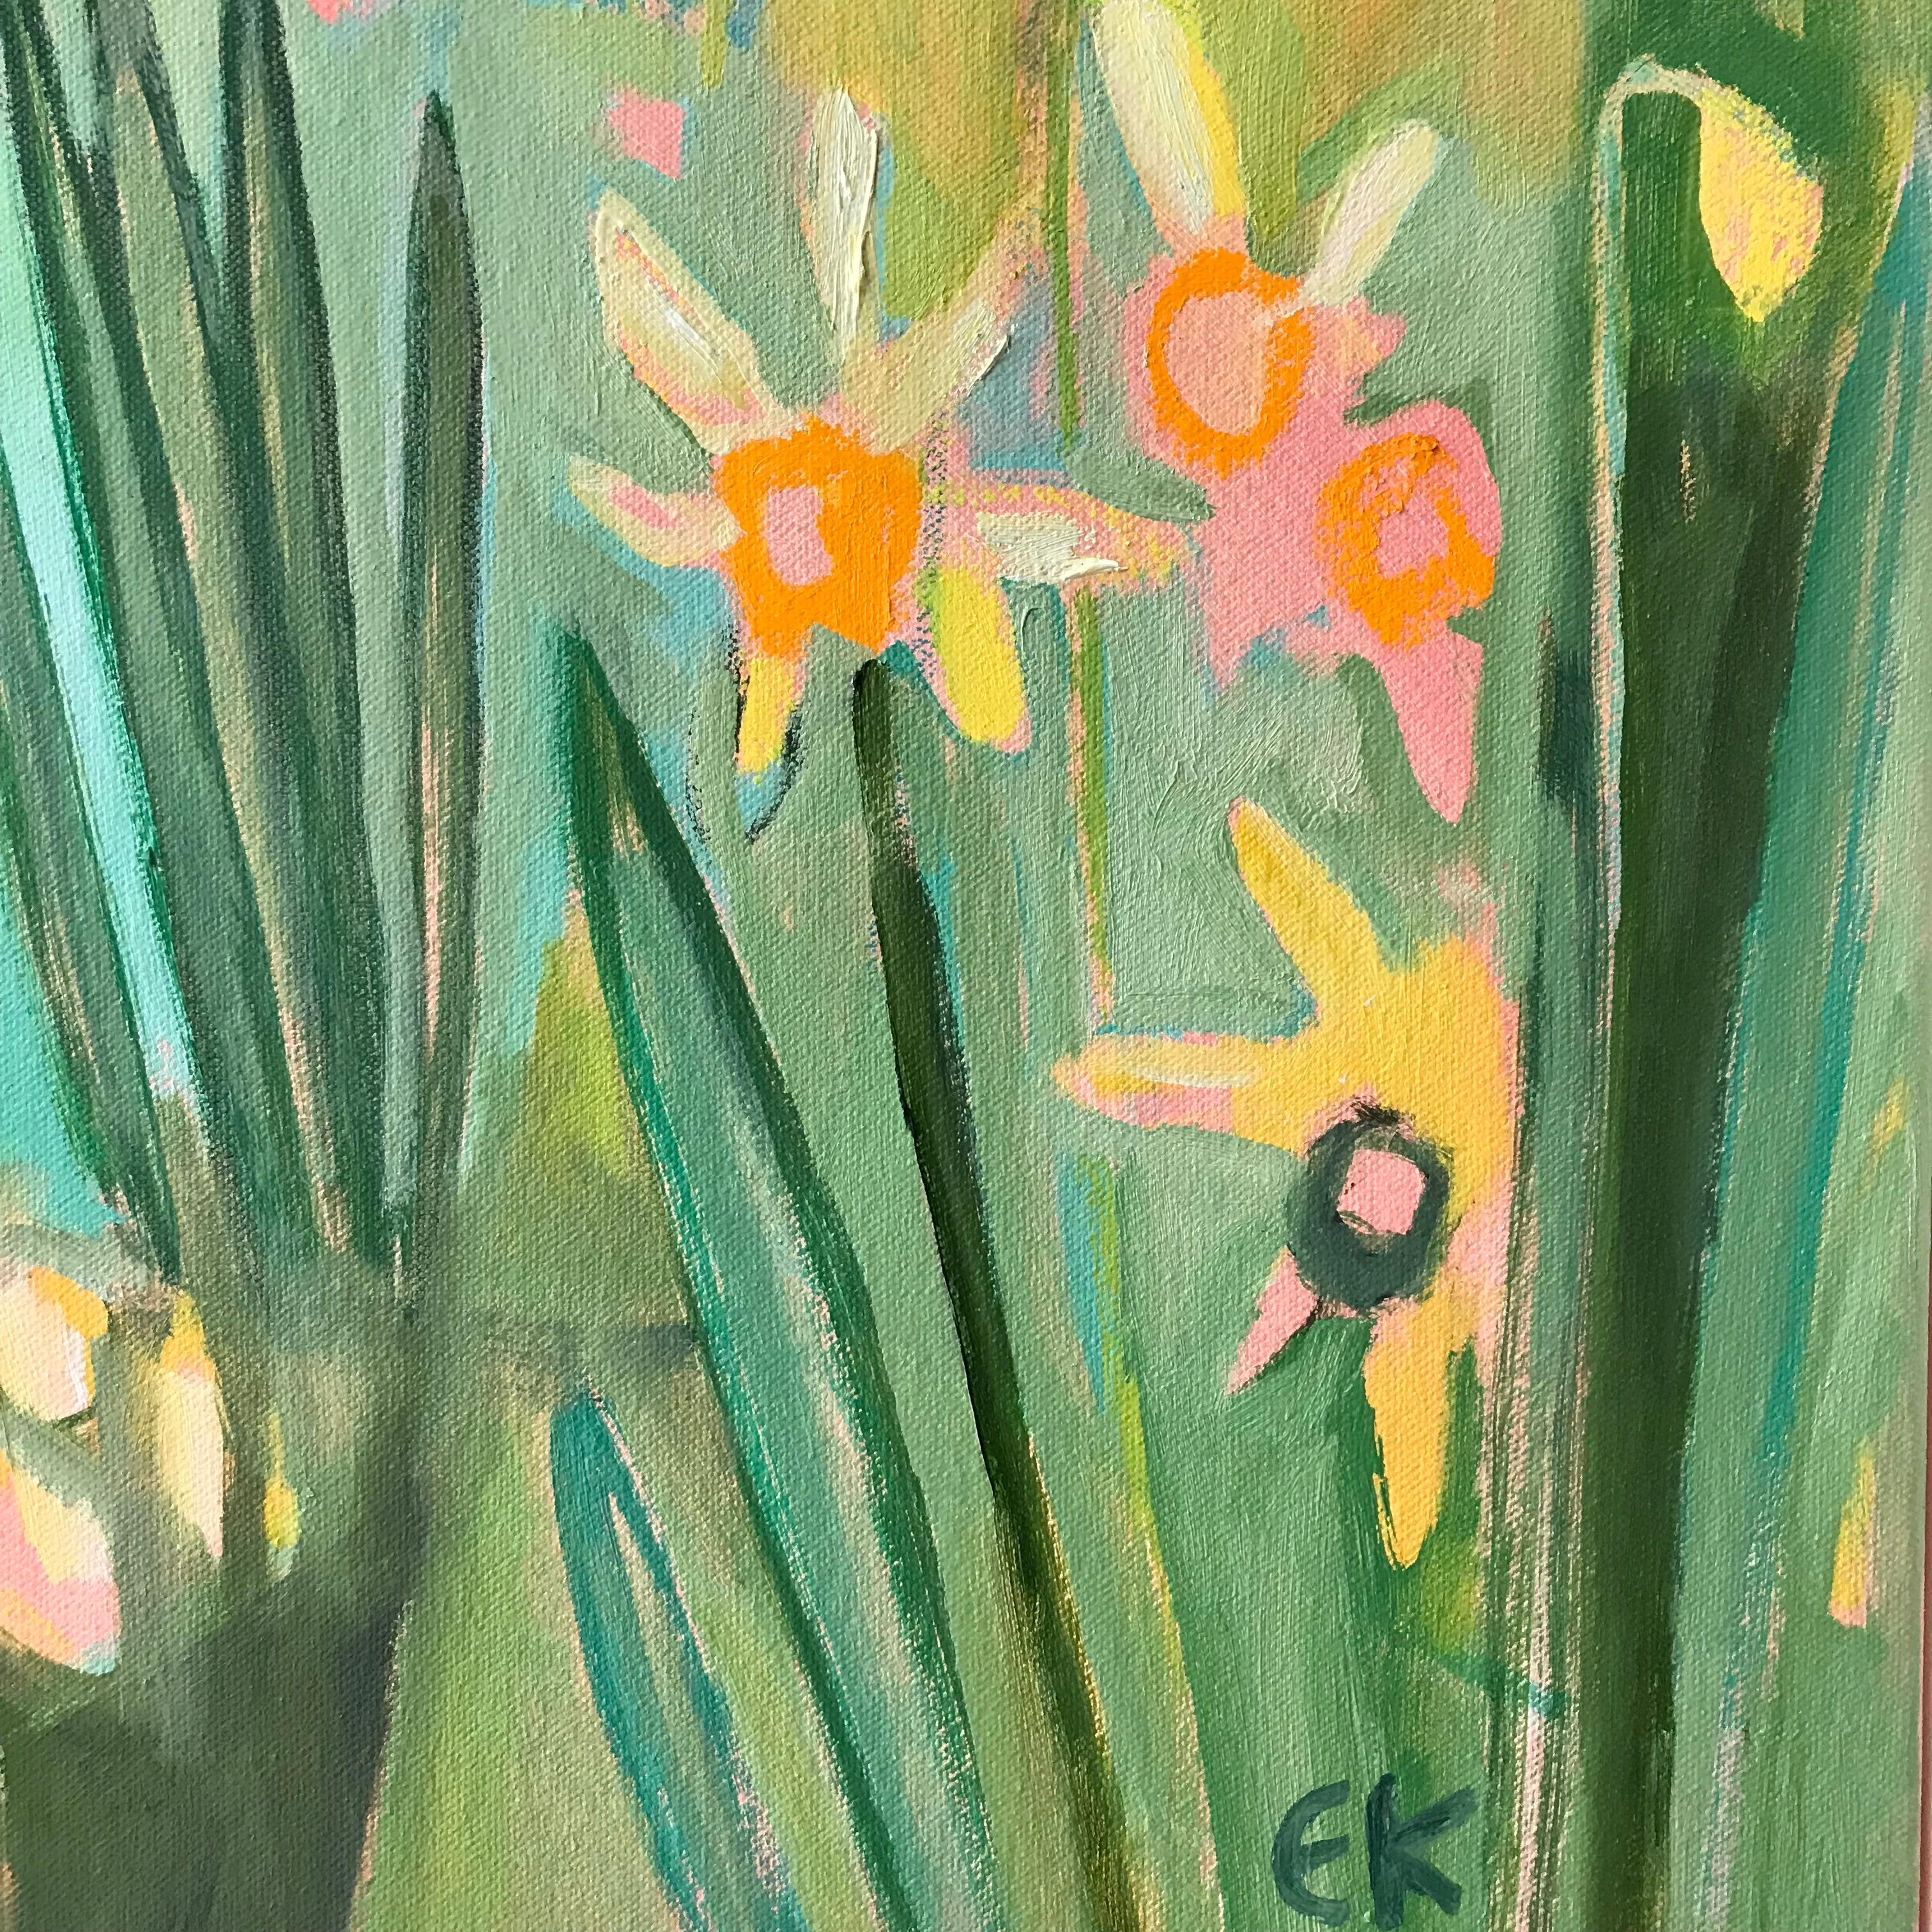 A scene of a Welsh woodland with wild daffodils dancing in the breeze in early spring sunshine. The composition is made up of soft pastel greens and blue-greens of the foliage against the fresh bright yellow of the flowers. Sunlight casts shadows on